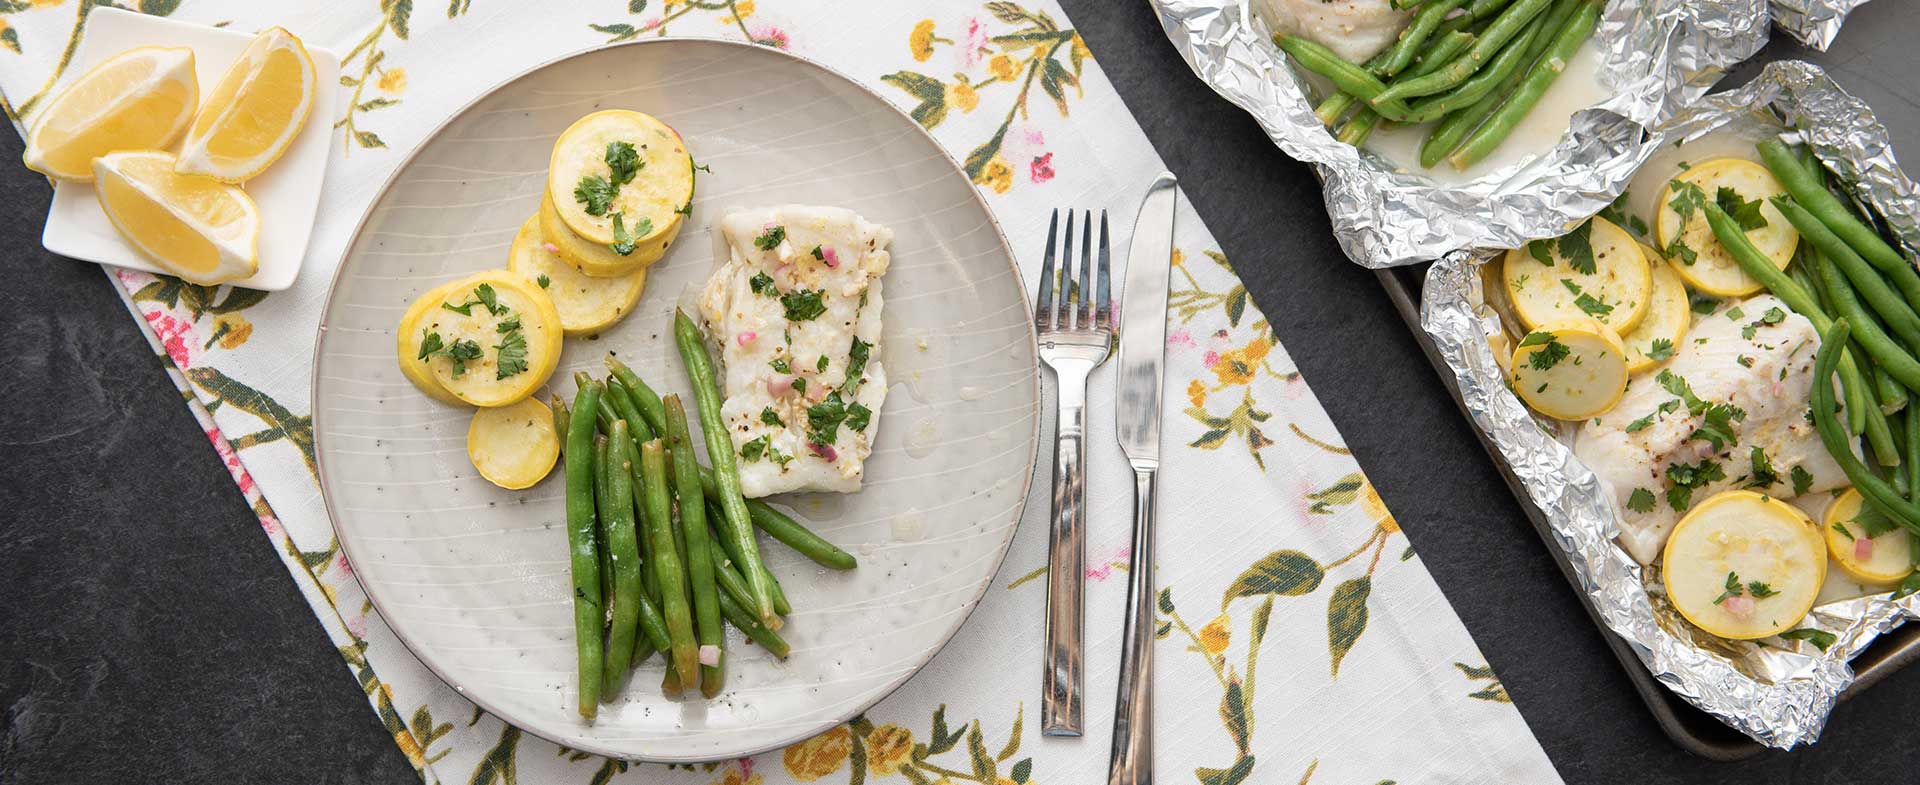 Foil-Baked Lemon Cod With Squash & Green Beans Recipe Video